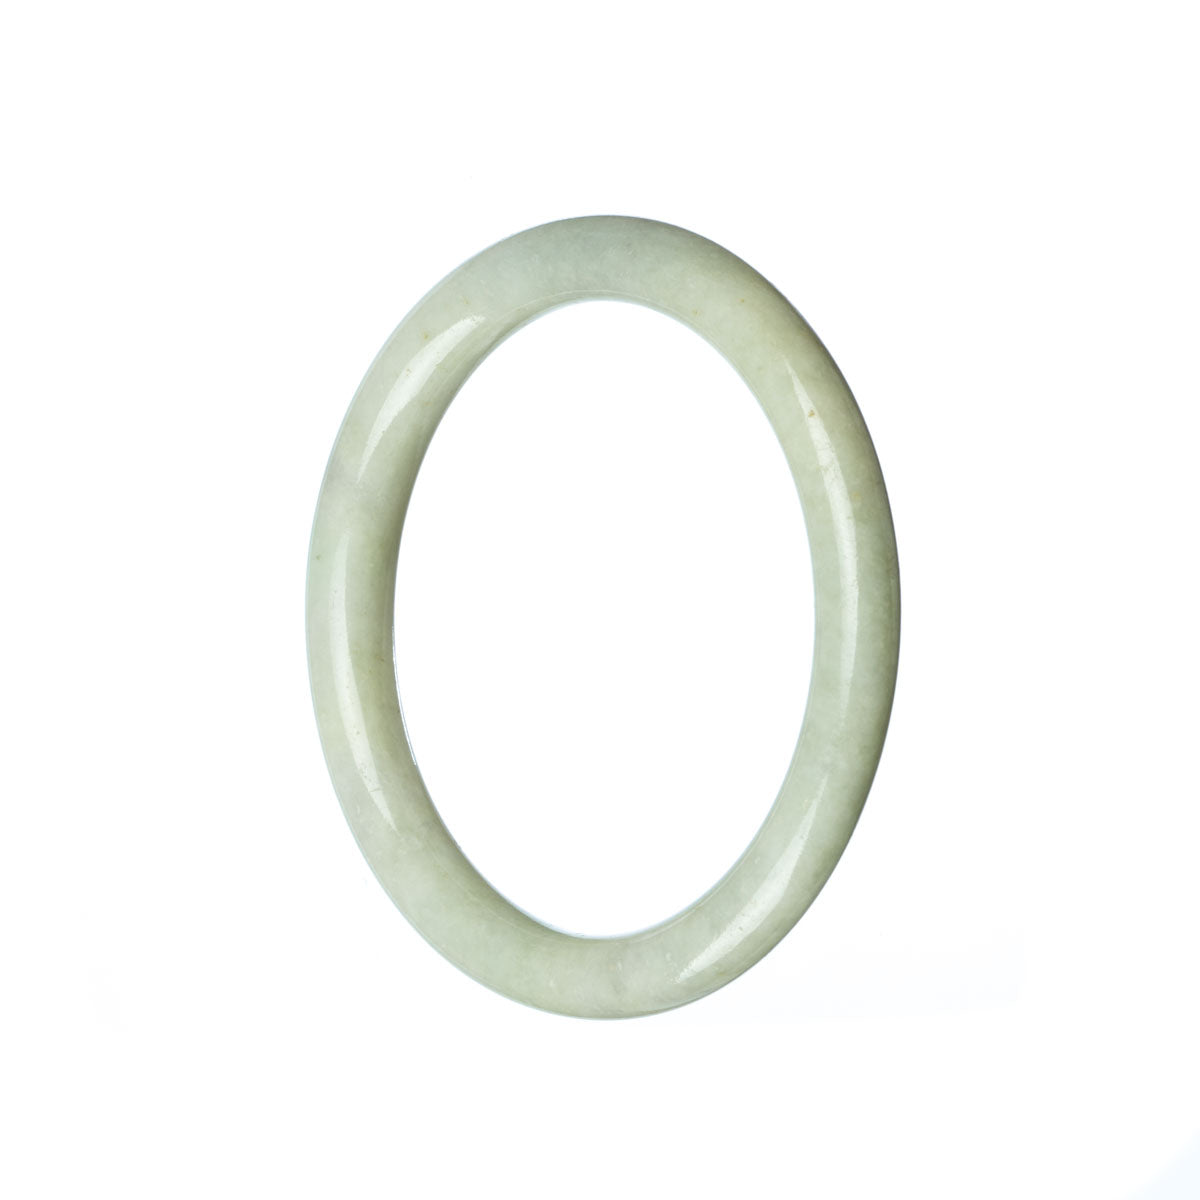 A small, round Type A Green Burmese Jade bangle with a diameter of 53mm, offered by MAYS GEMS.